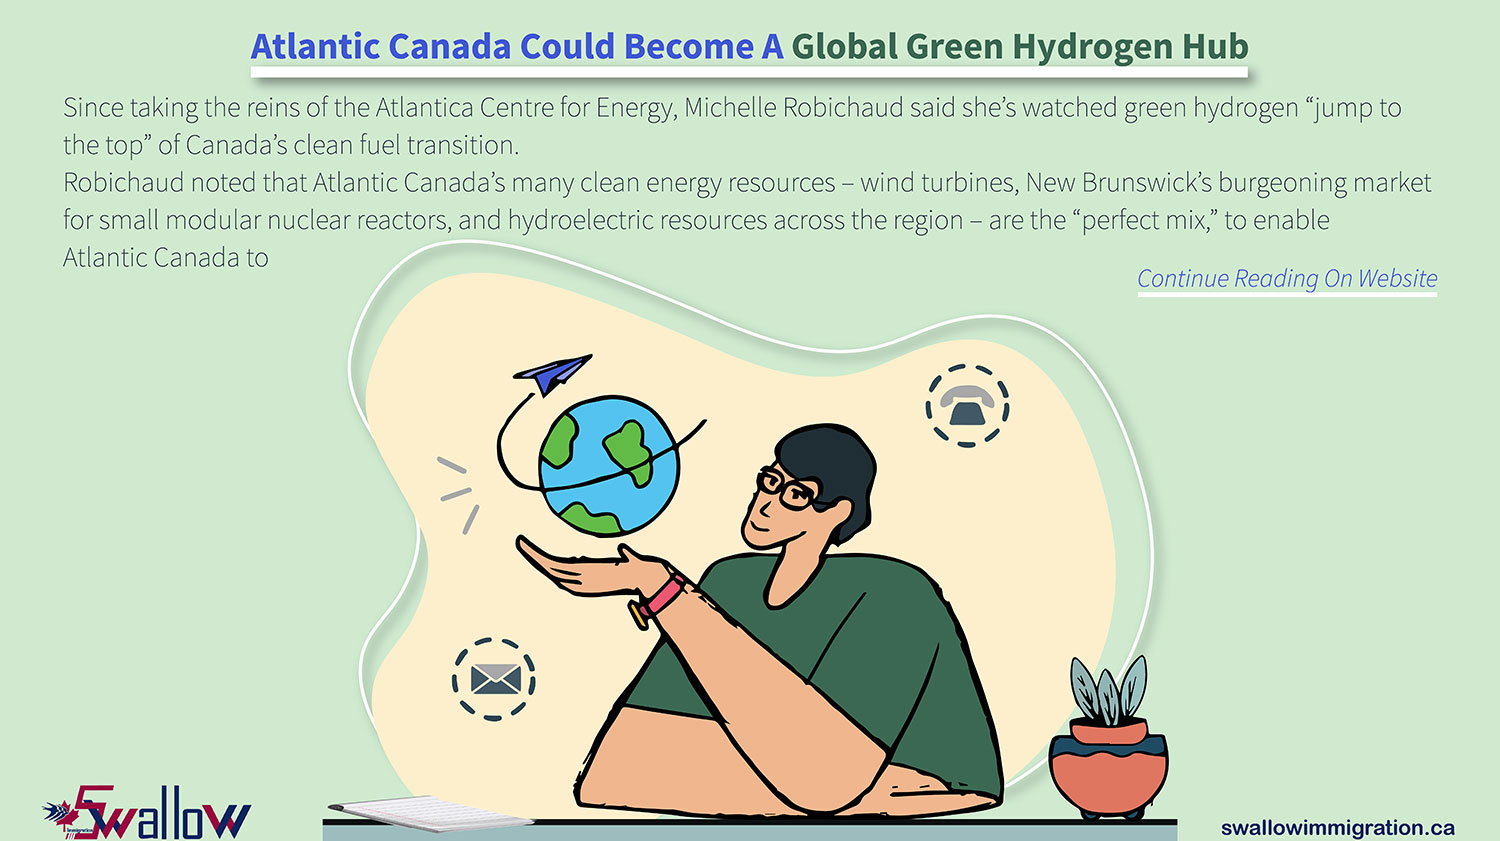 Atlantic Canada Could Become A Global Green Hydrogen Hub